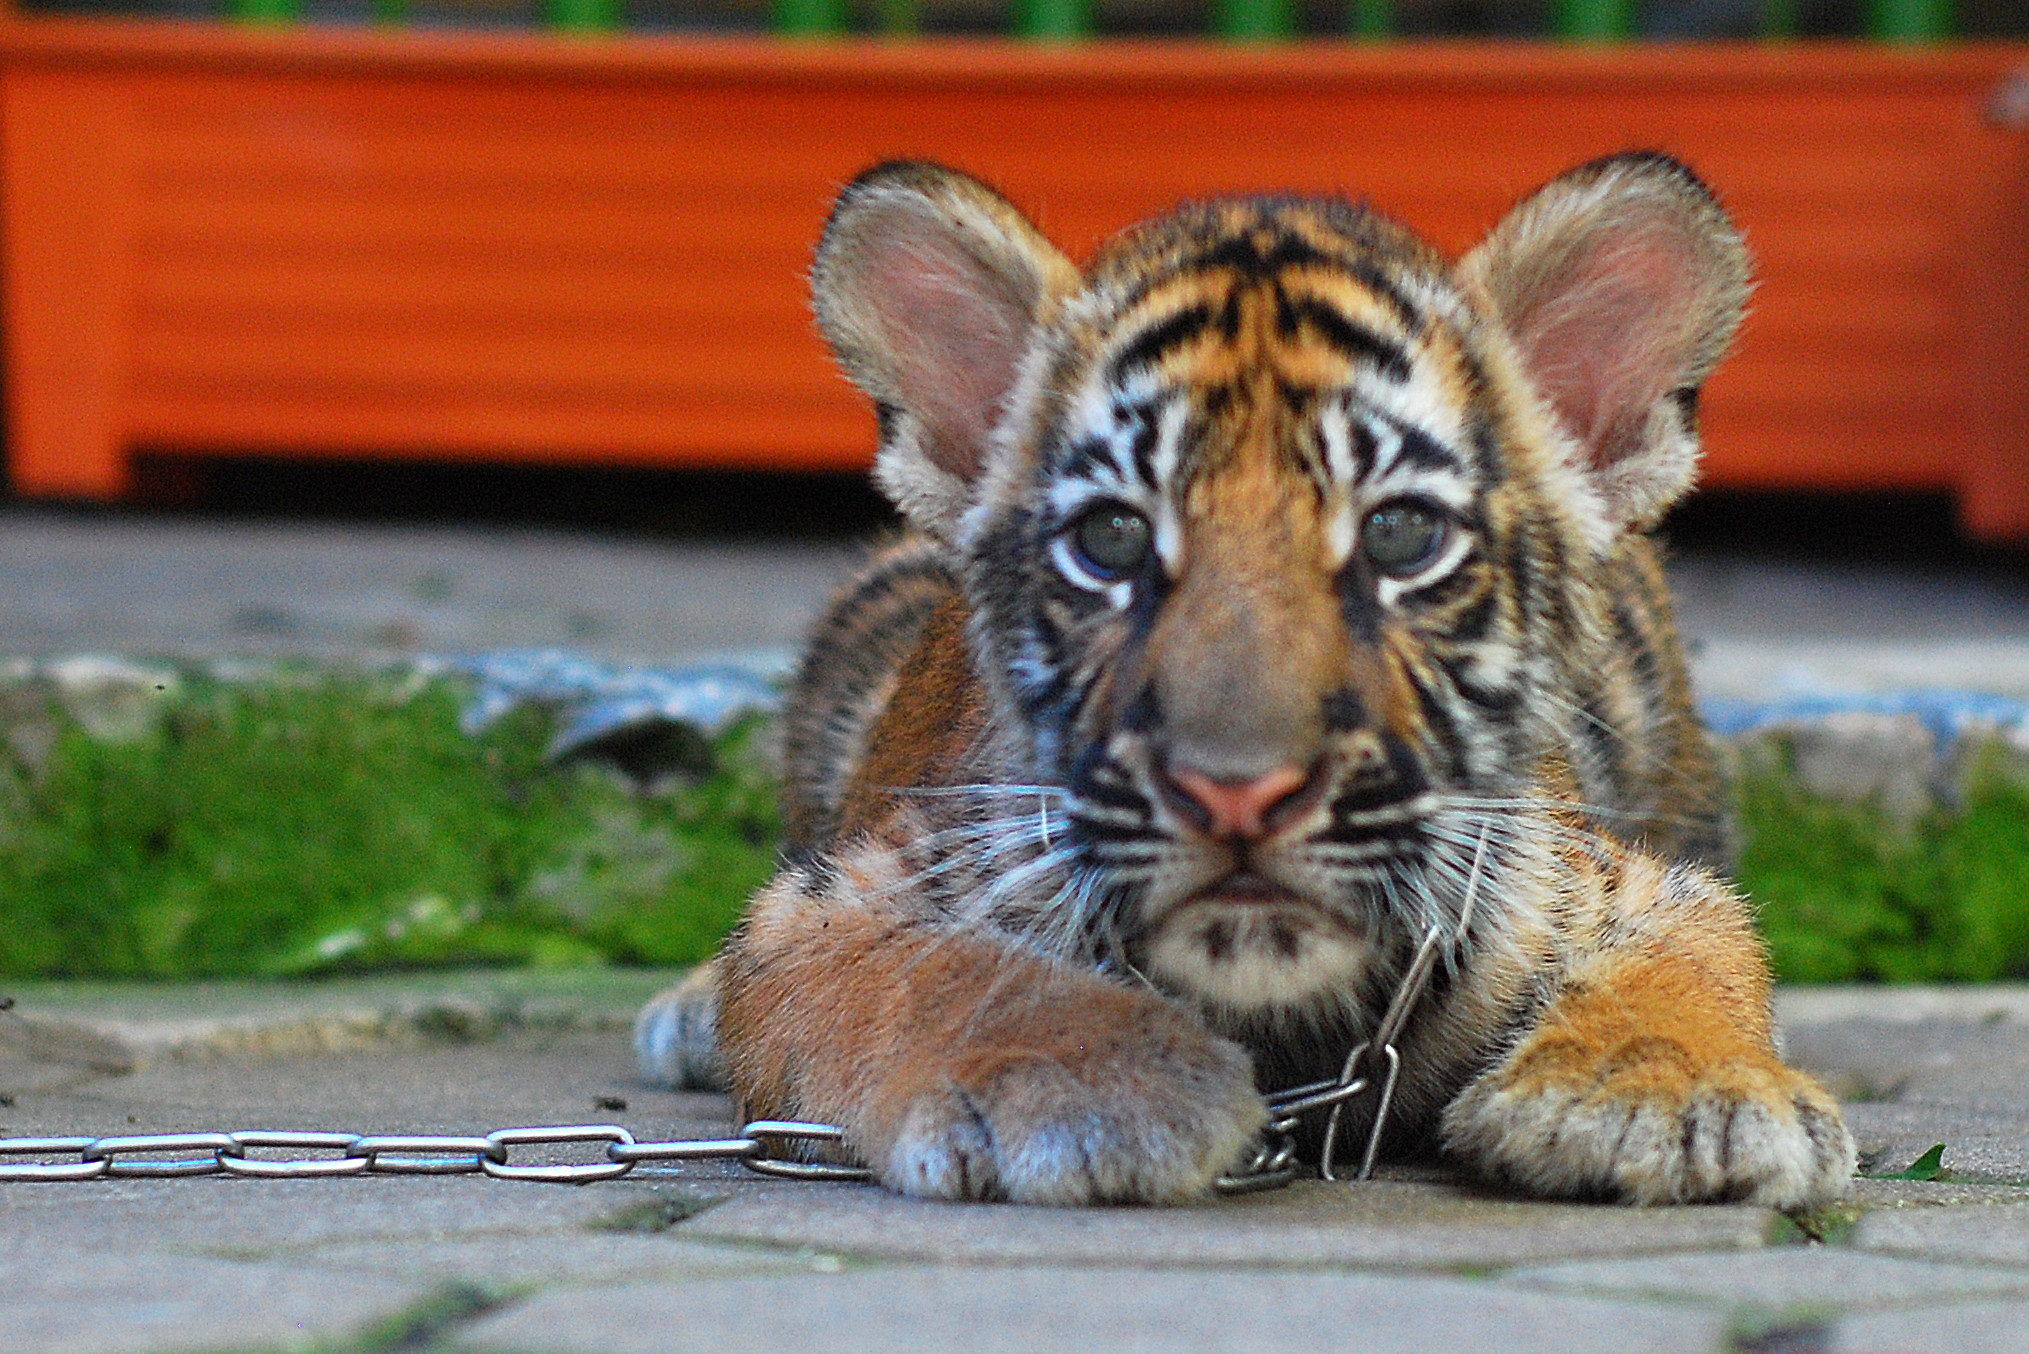 Young tiger chained at tourist attraction